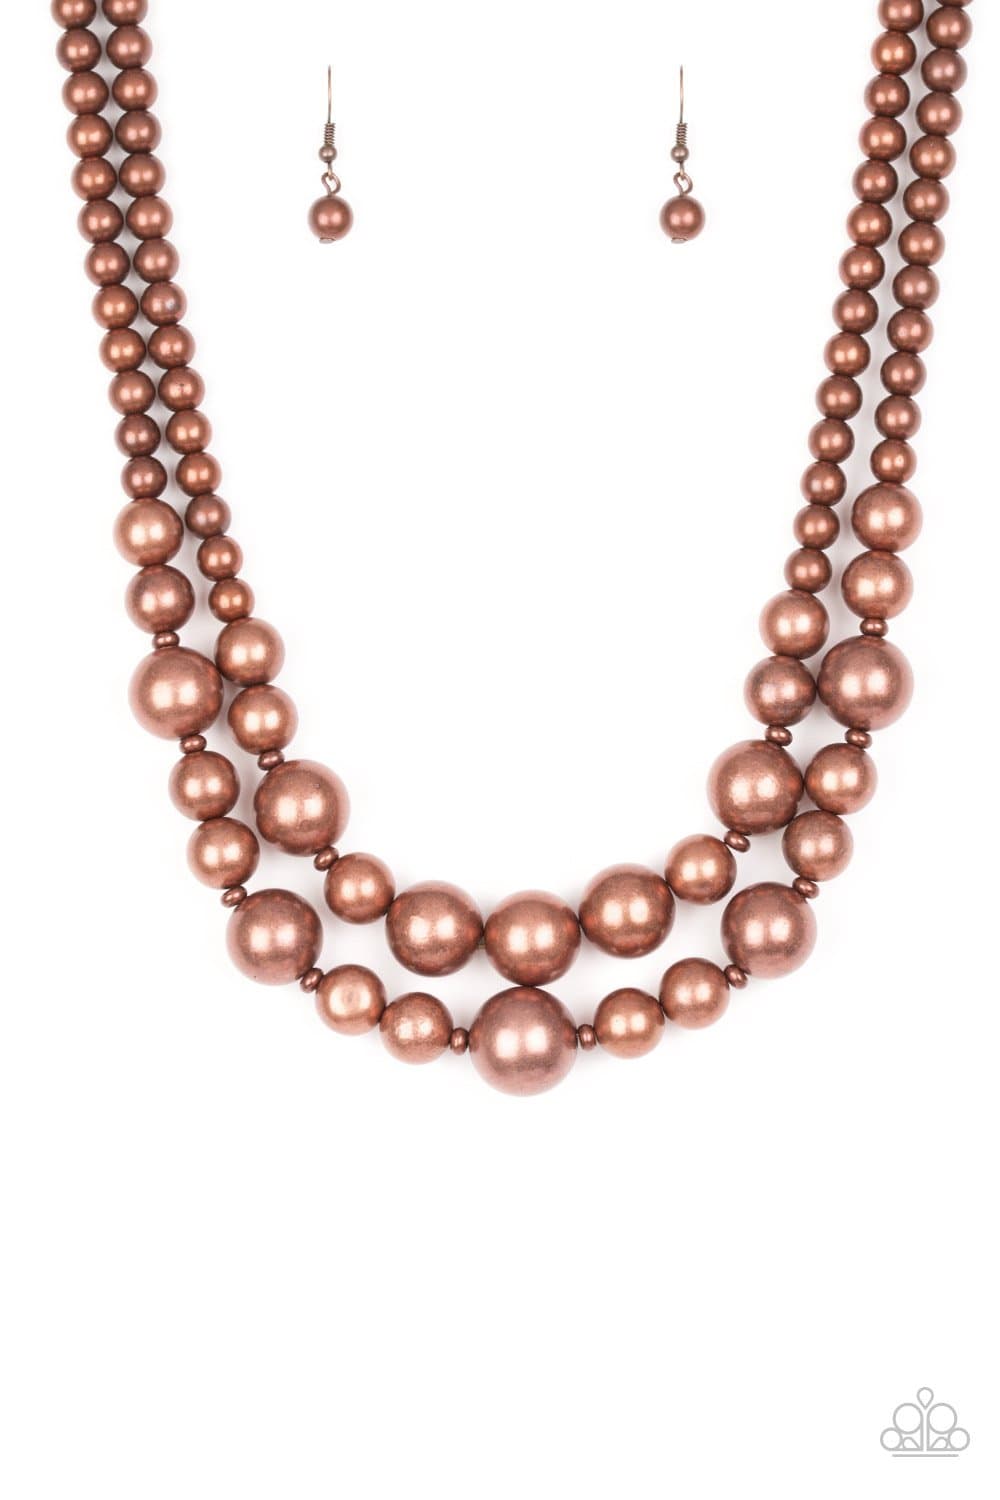 (Coming Soon) I Double Dare You - Copper - Paparazzi Necklace